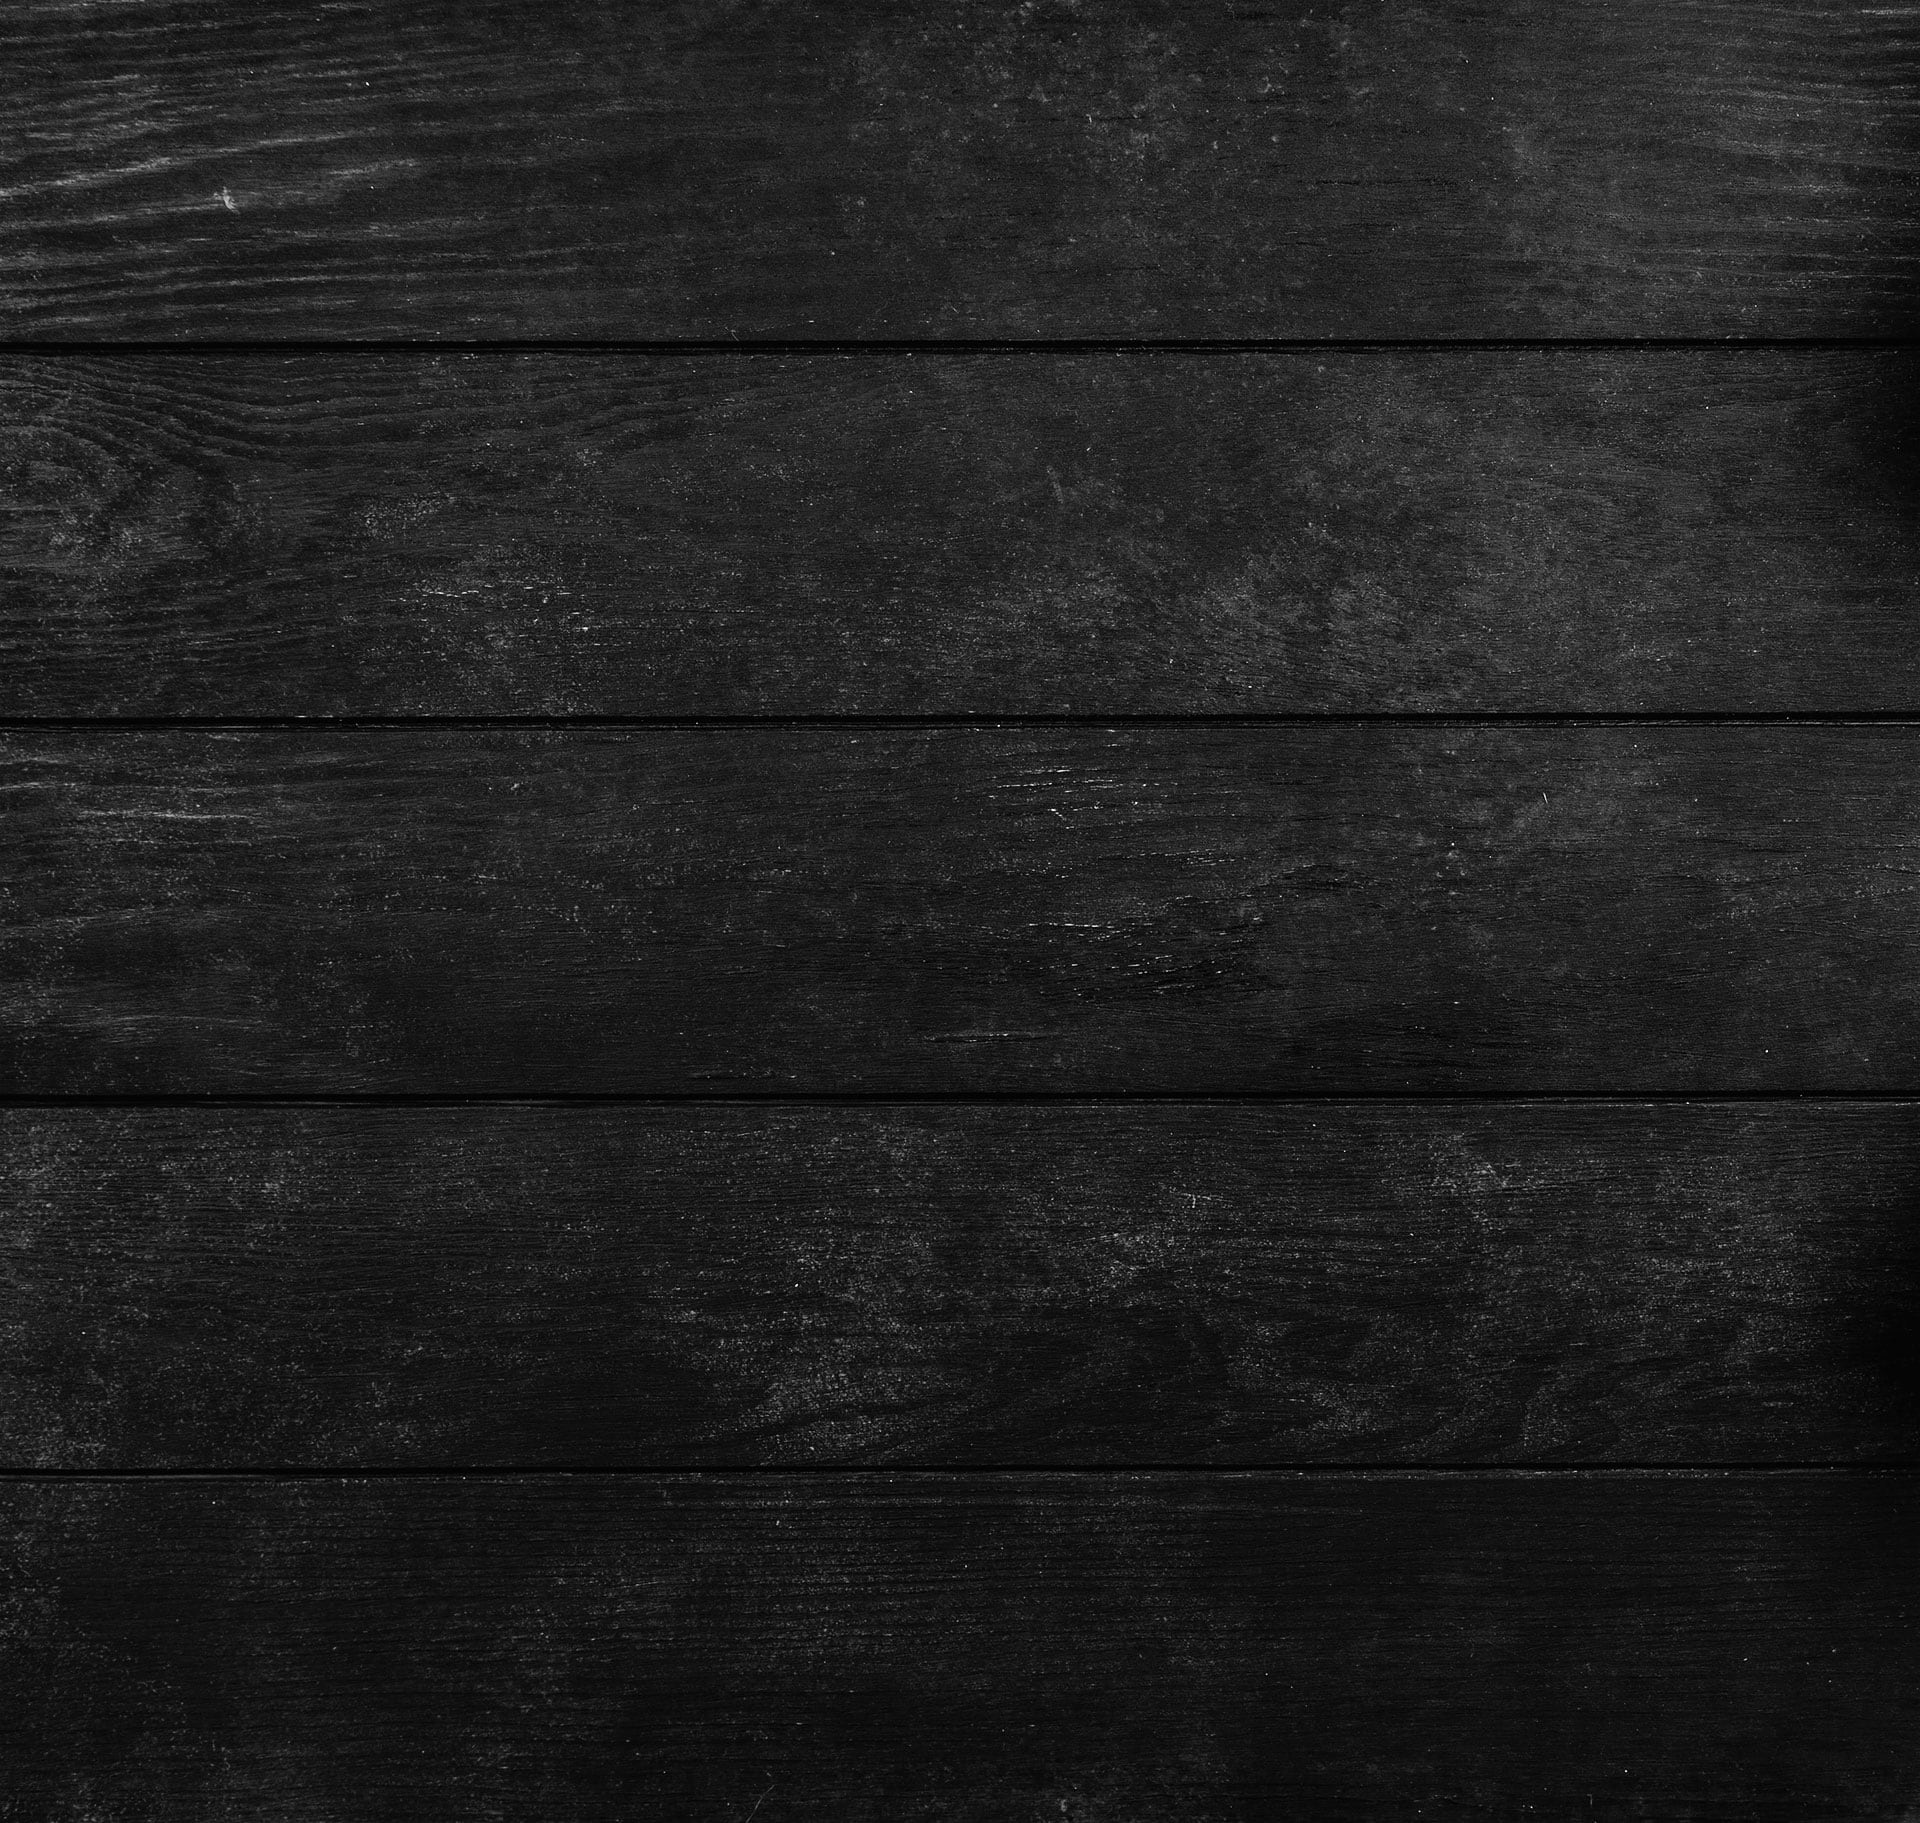 Rustic wood background